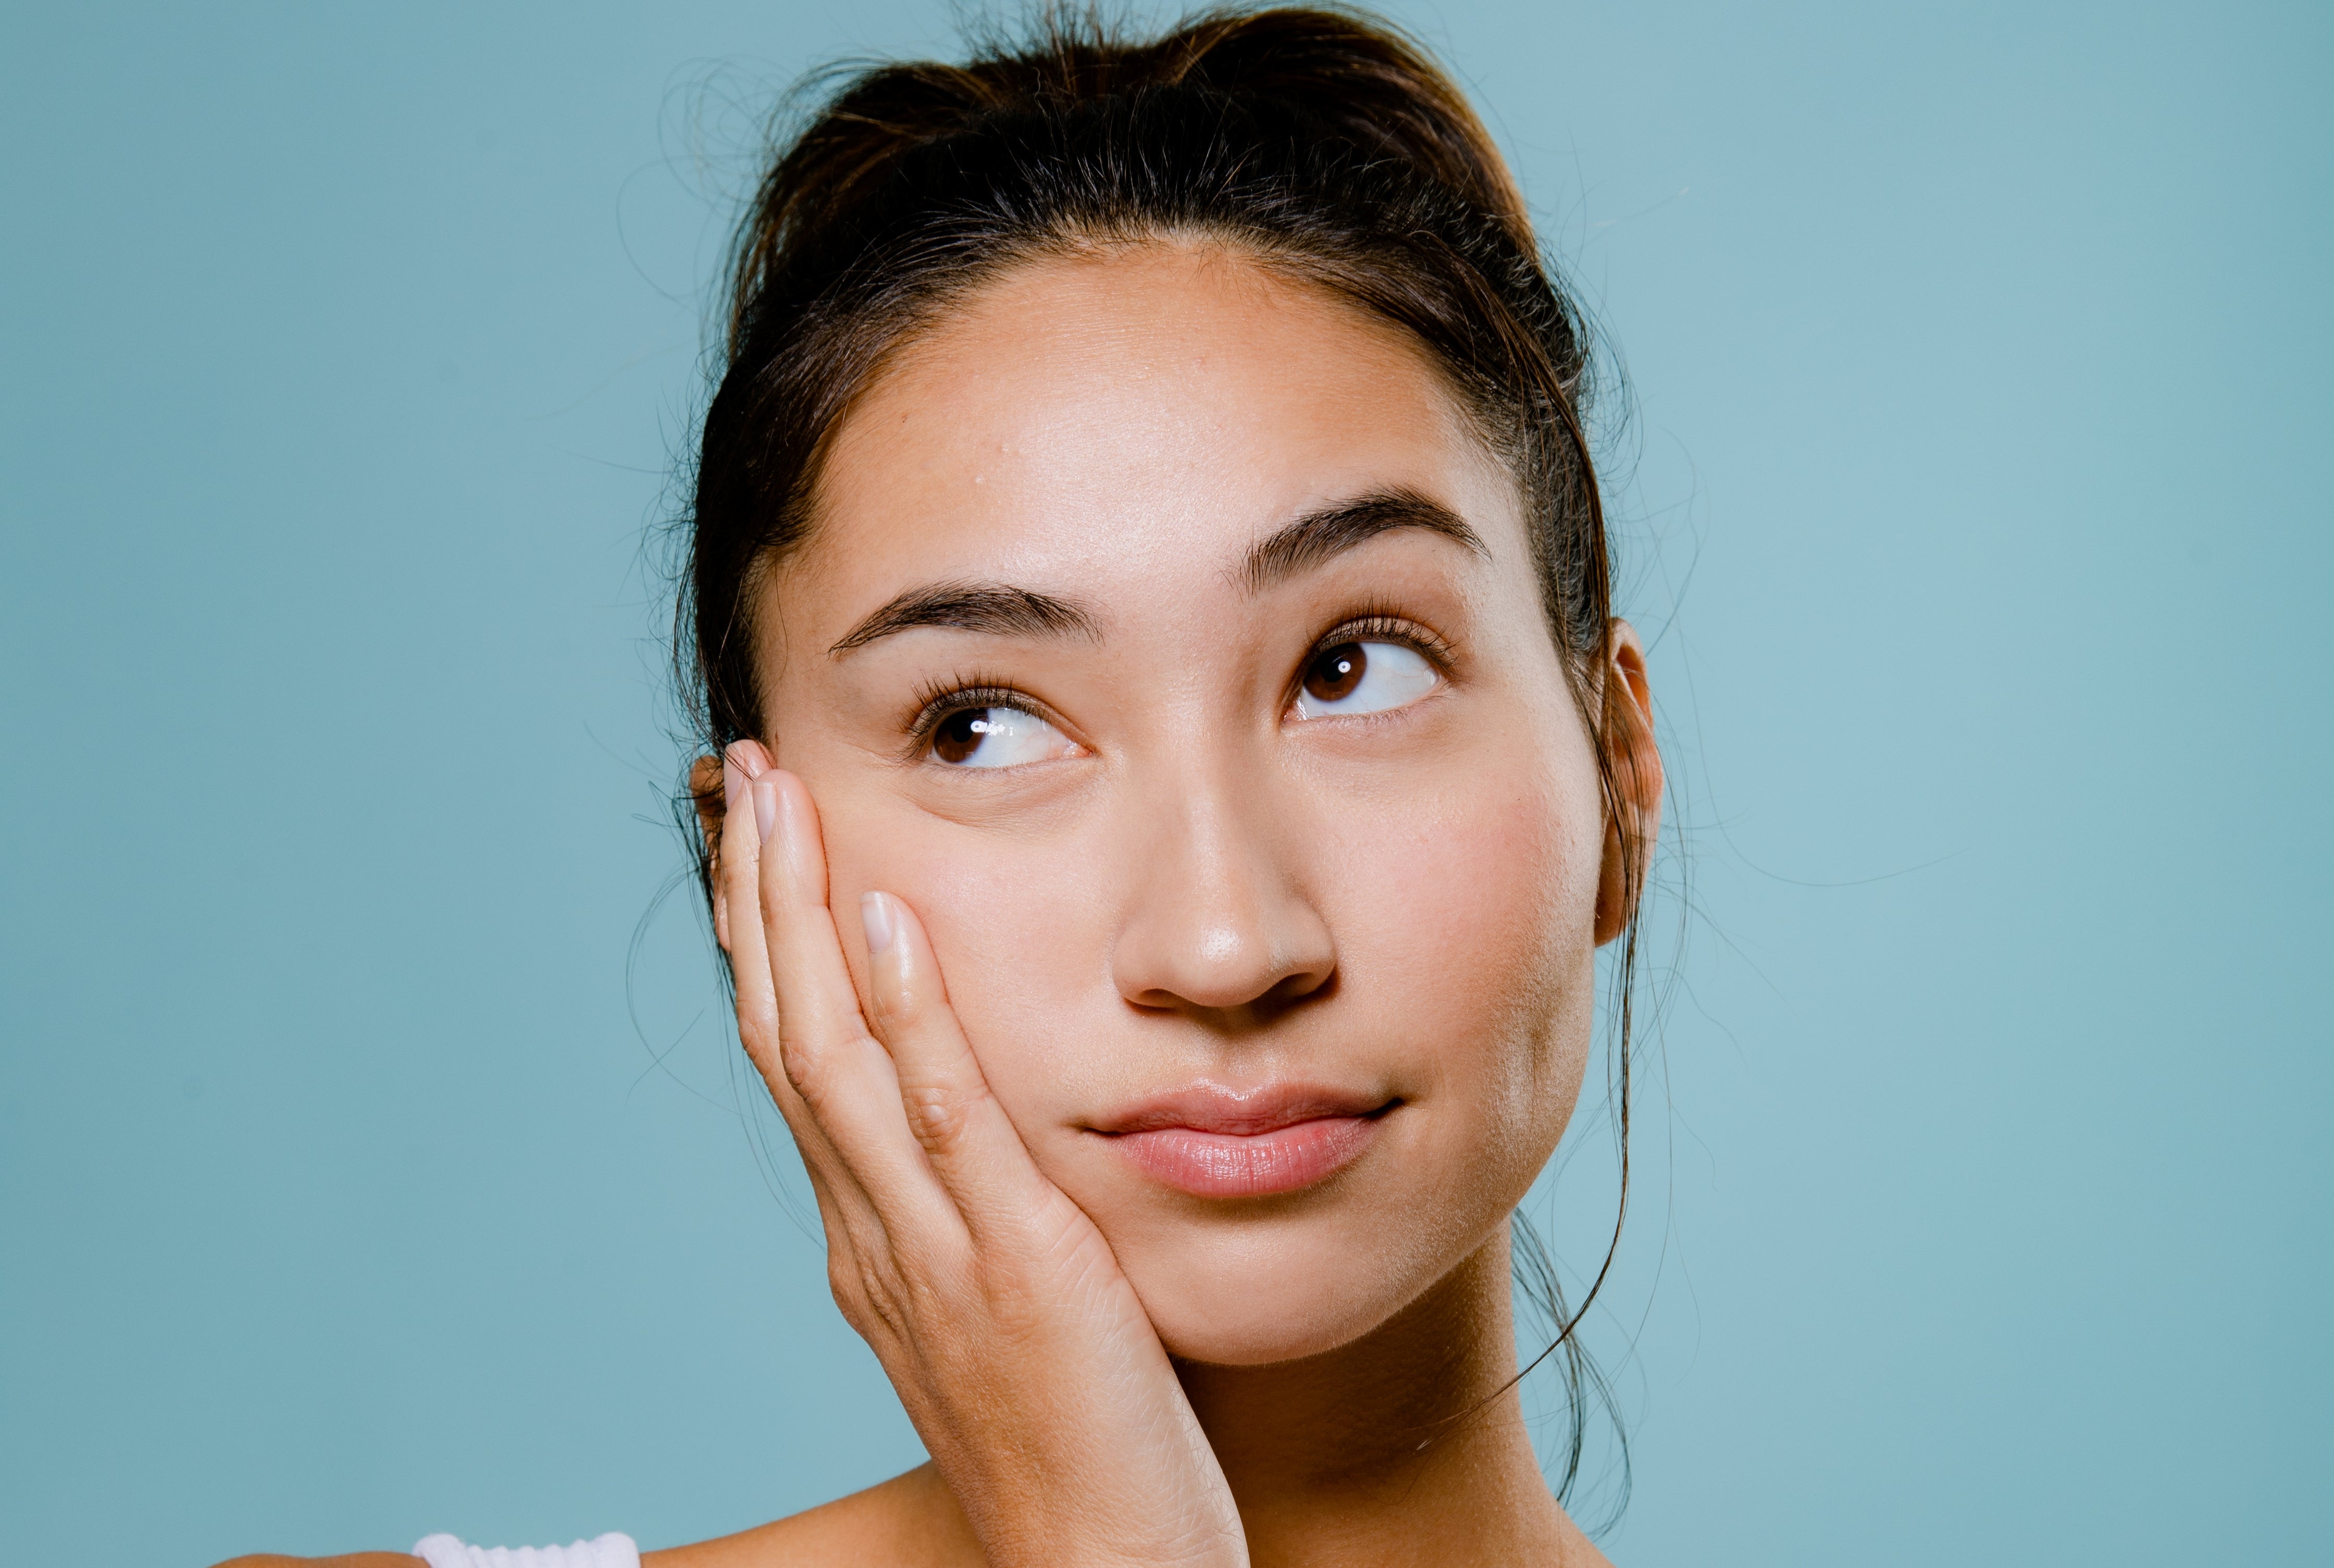 Woman washing face looking shocked - common skincare mistakes